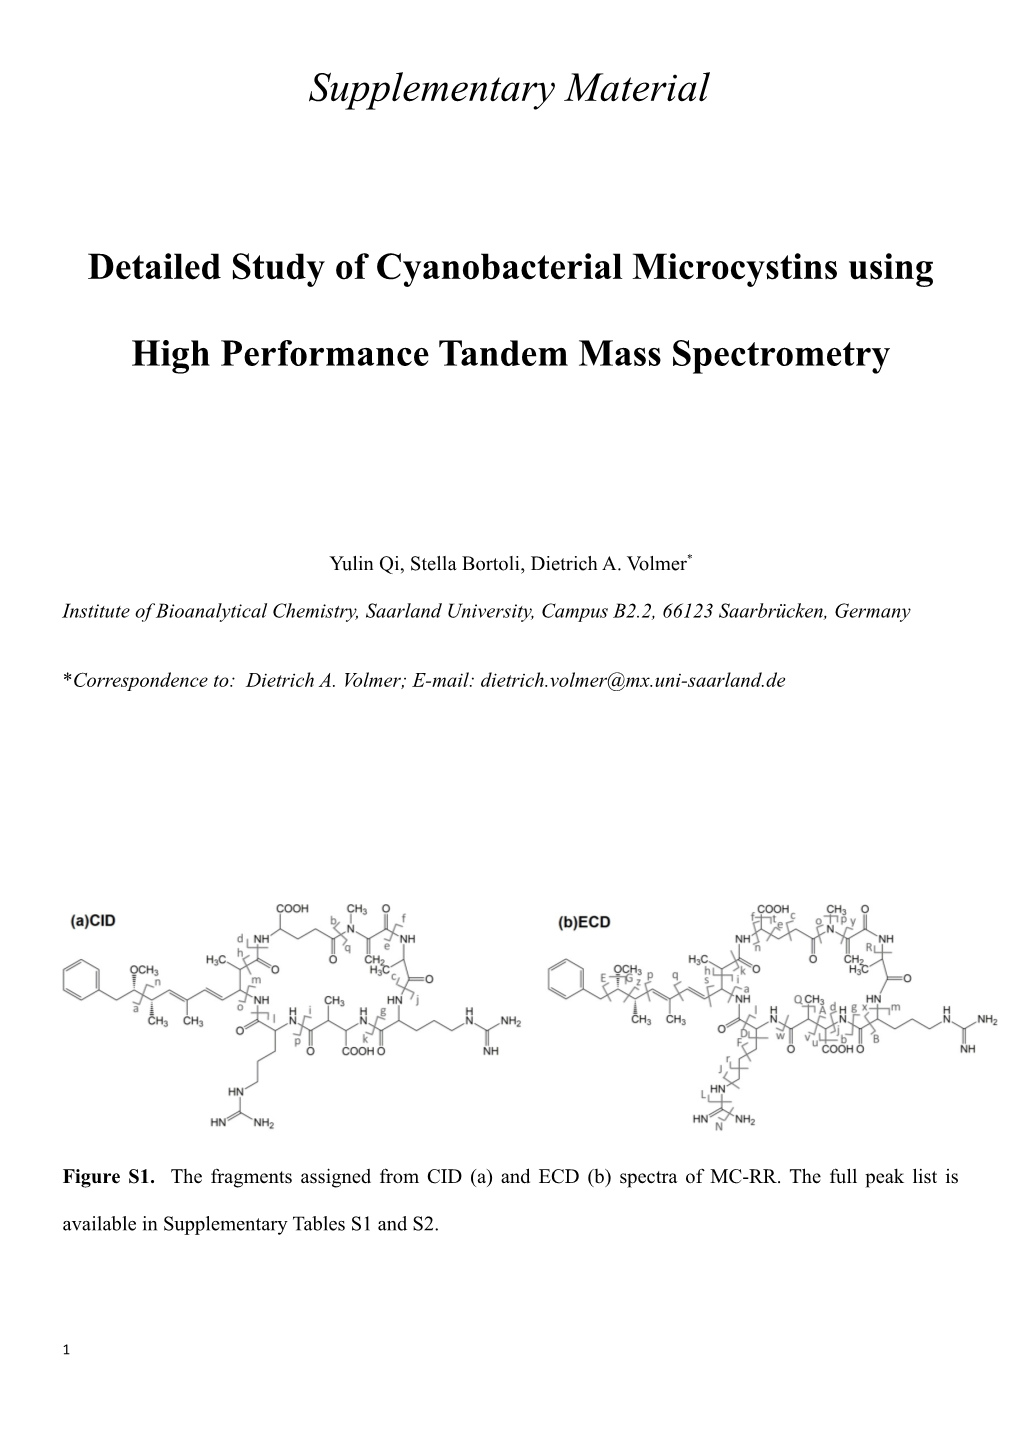 Detailed Study of Cyanobacterial Microcystins Using High Performance Tandem Mass Spectrometry